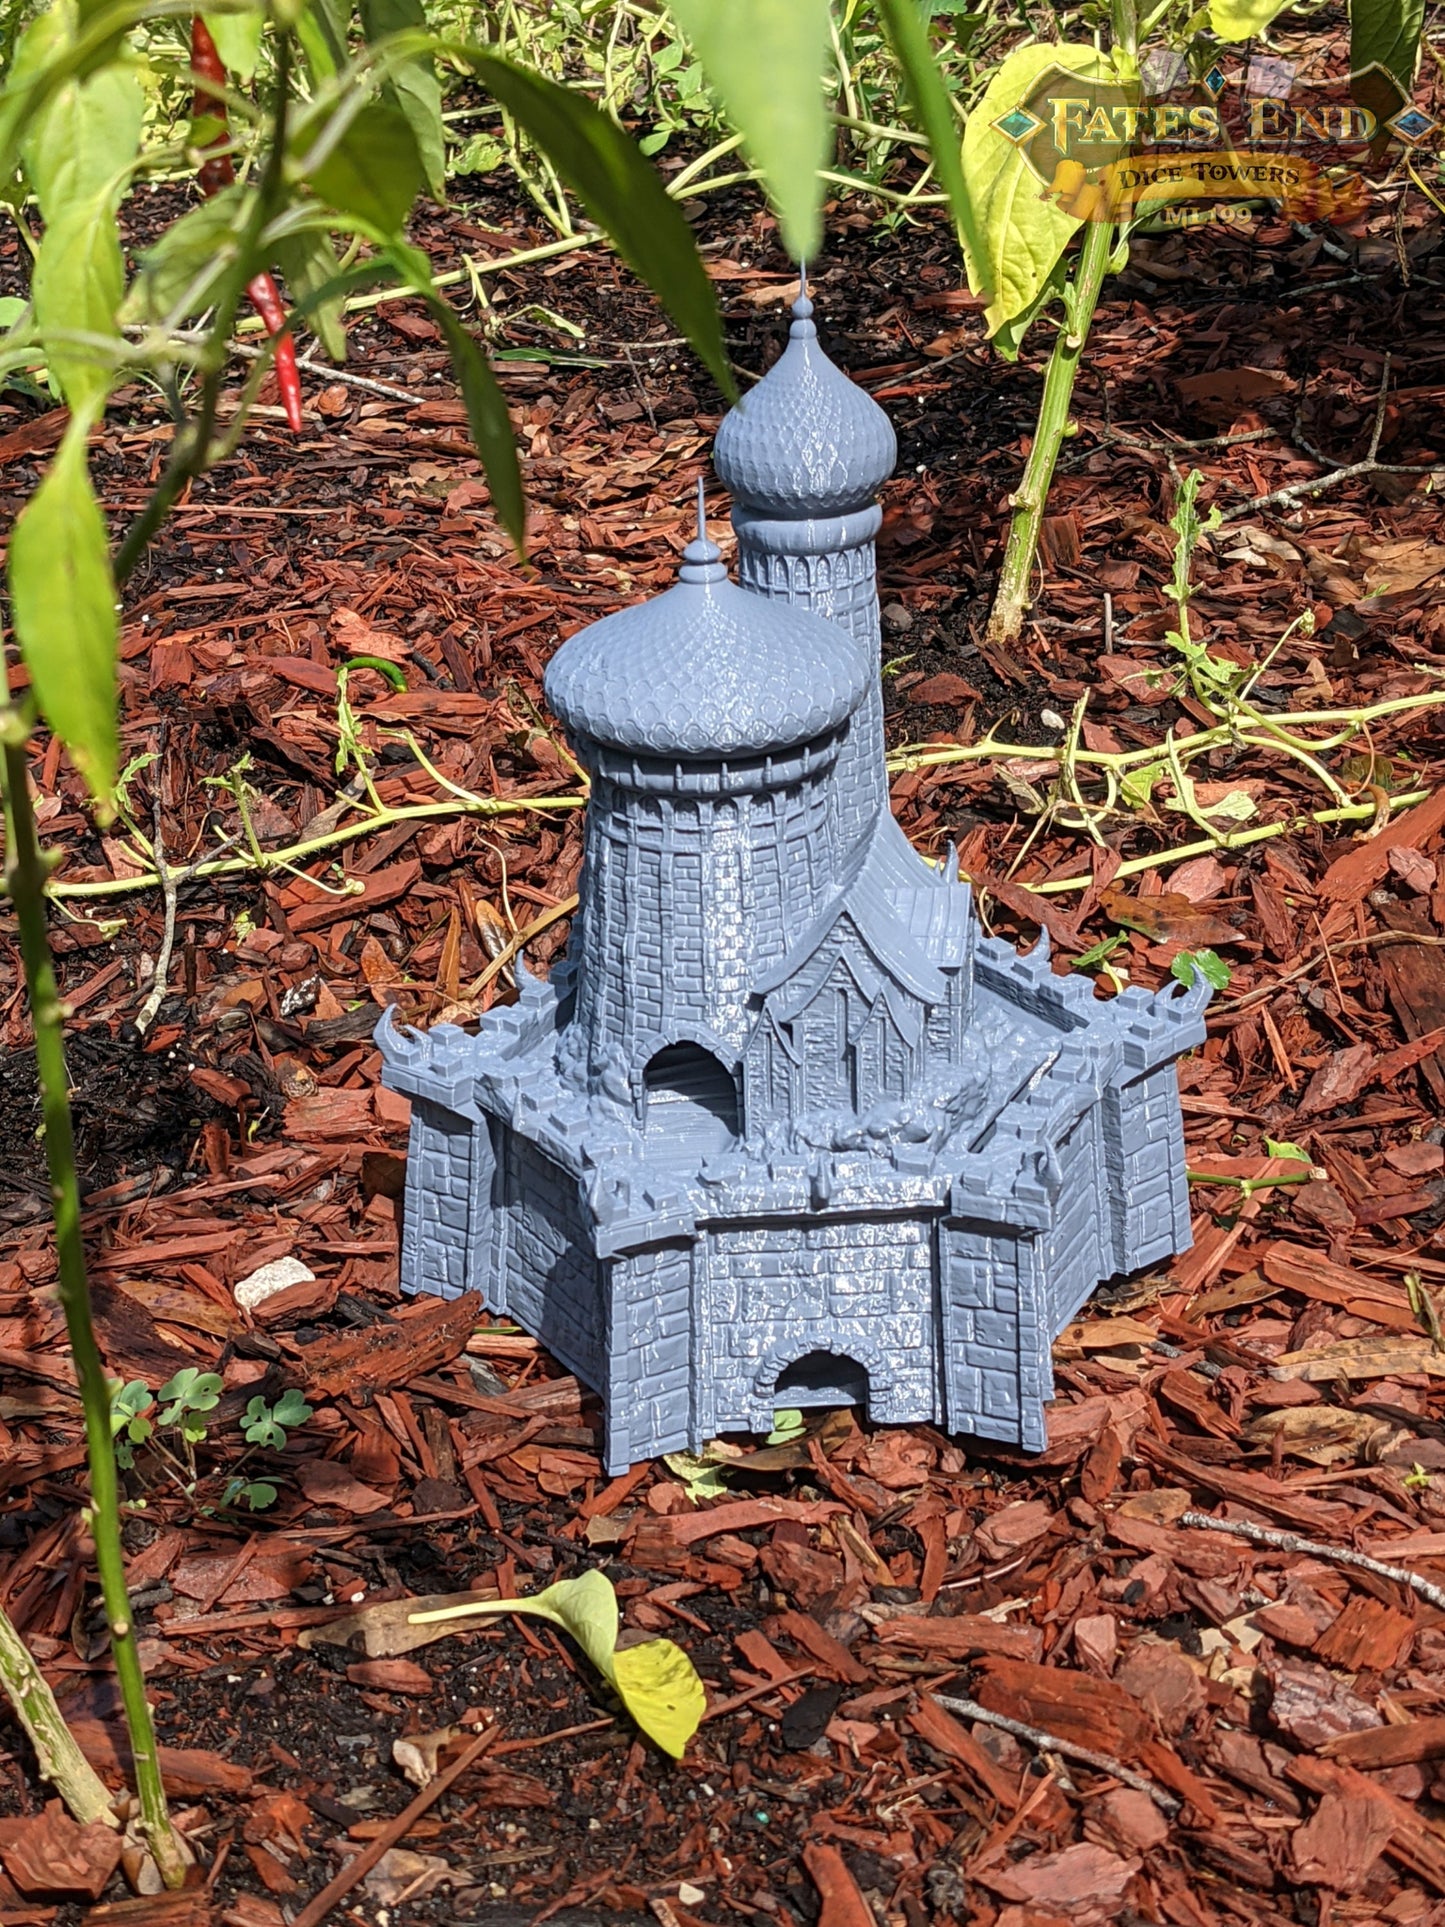 Dragonlance Weis-Hickman 3D Printed Dice Tower - Fate's End Collection - Embark on Legendary Quests, Honoring Epic Narratives with Each Roll